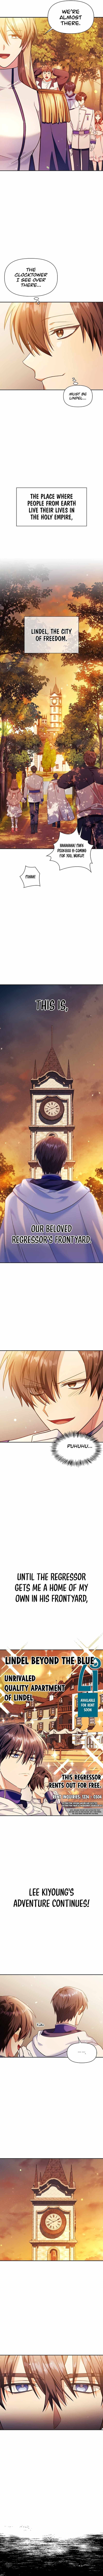 Regressor Instruction Manual Chapter 42 Page 6